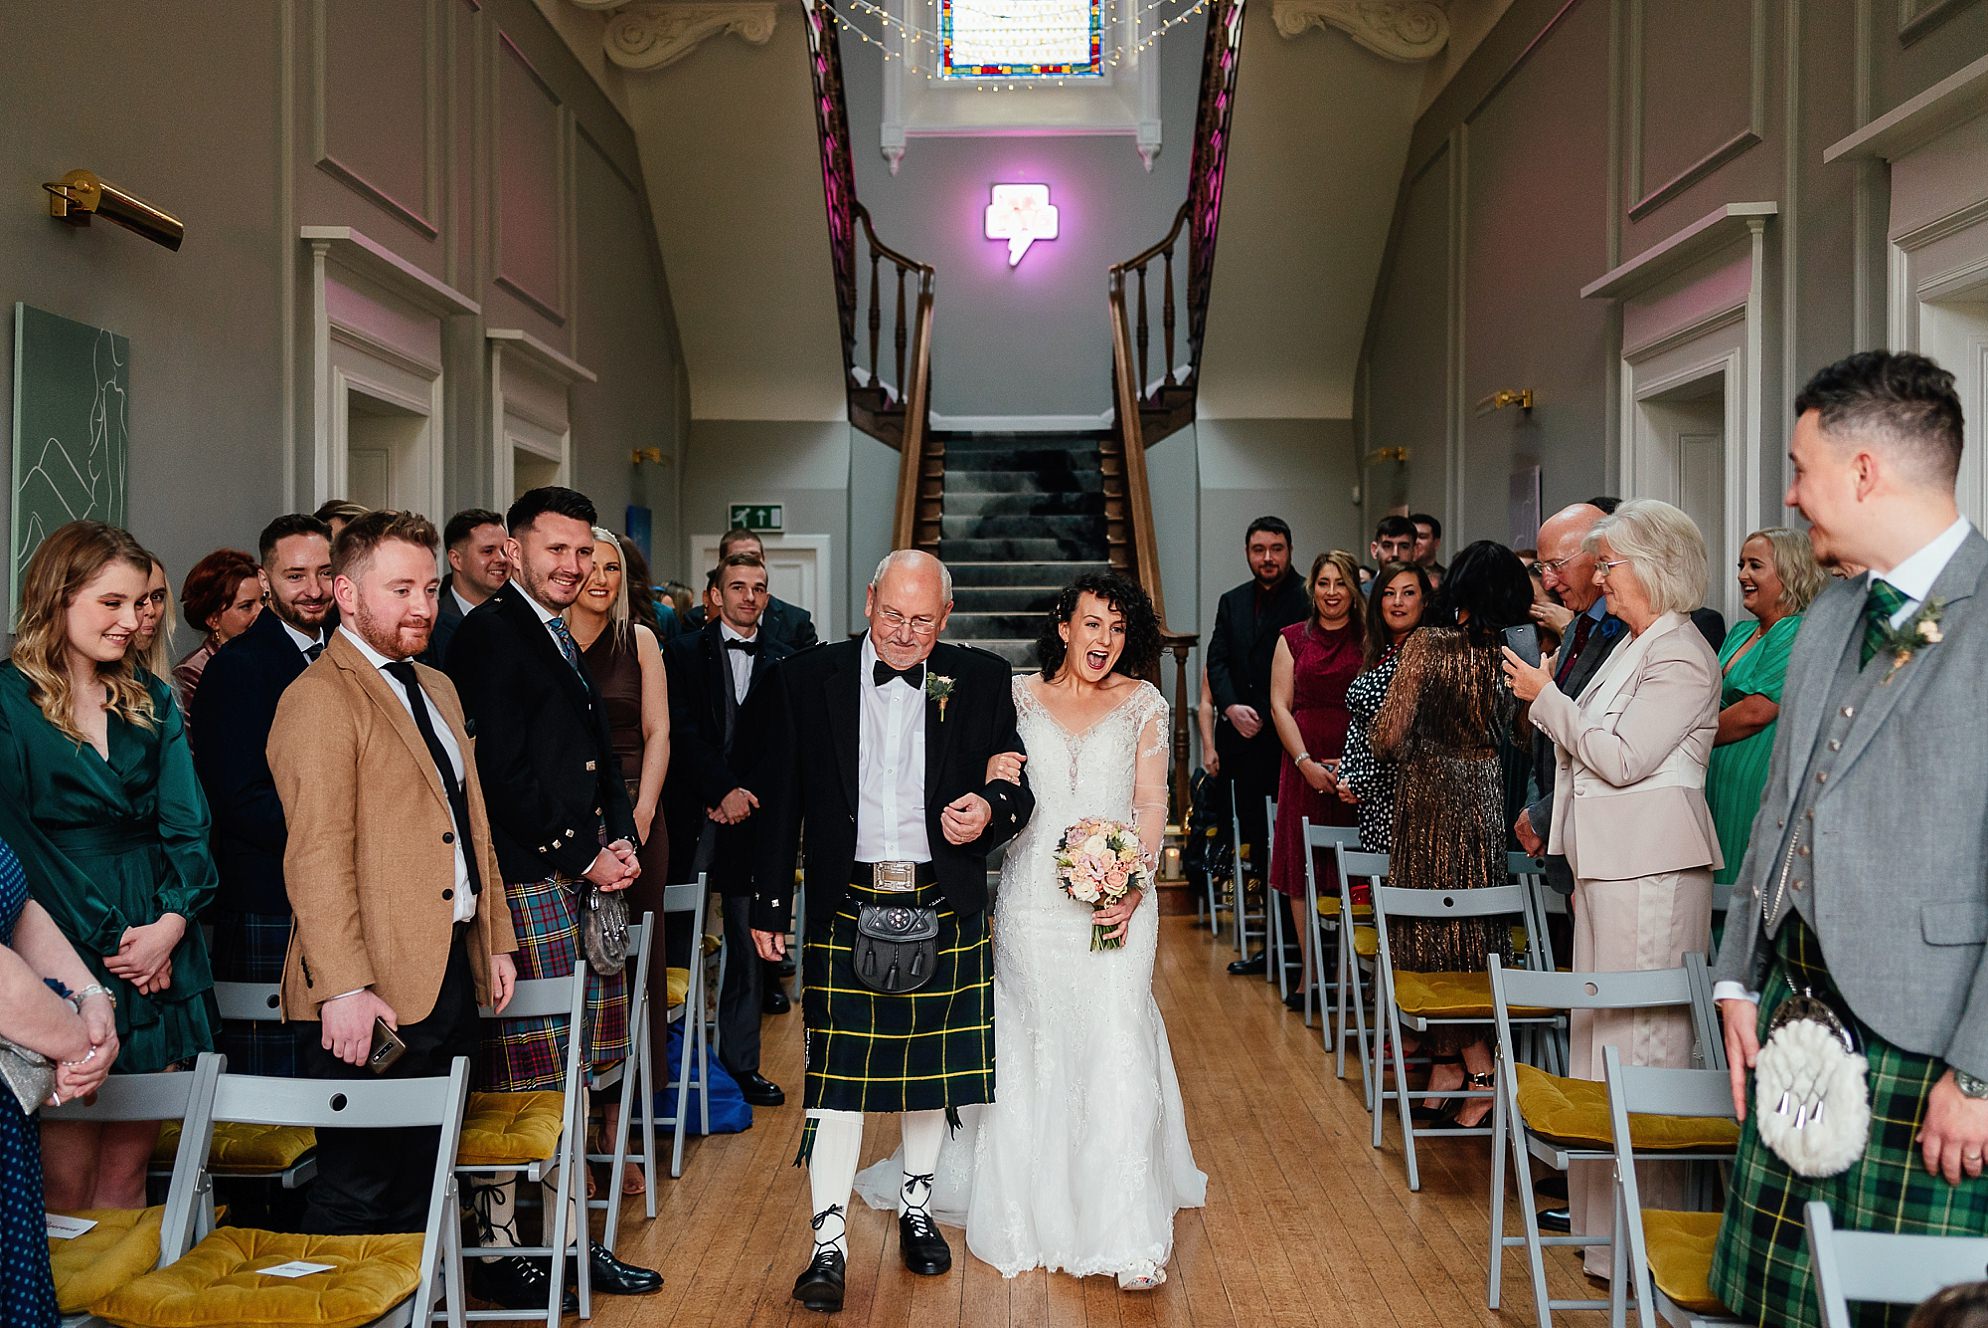 Interior inside Netherbyres House Wedding near Eyemouth in Scotland Guests family and friends stand up from their sea-grey folding chairs with colourful mustard cushions to welcome the bride in a lace gown as she walks down the aisle accompanied by an older gentleman in a kilt Bright pink fun neon sign and fairy lights light up the carved wooden victorian grand staircase in the ornate grand hall